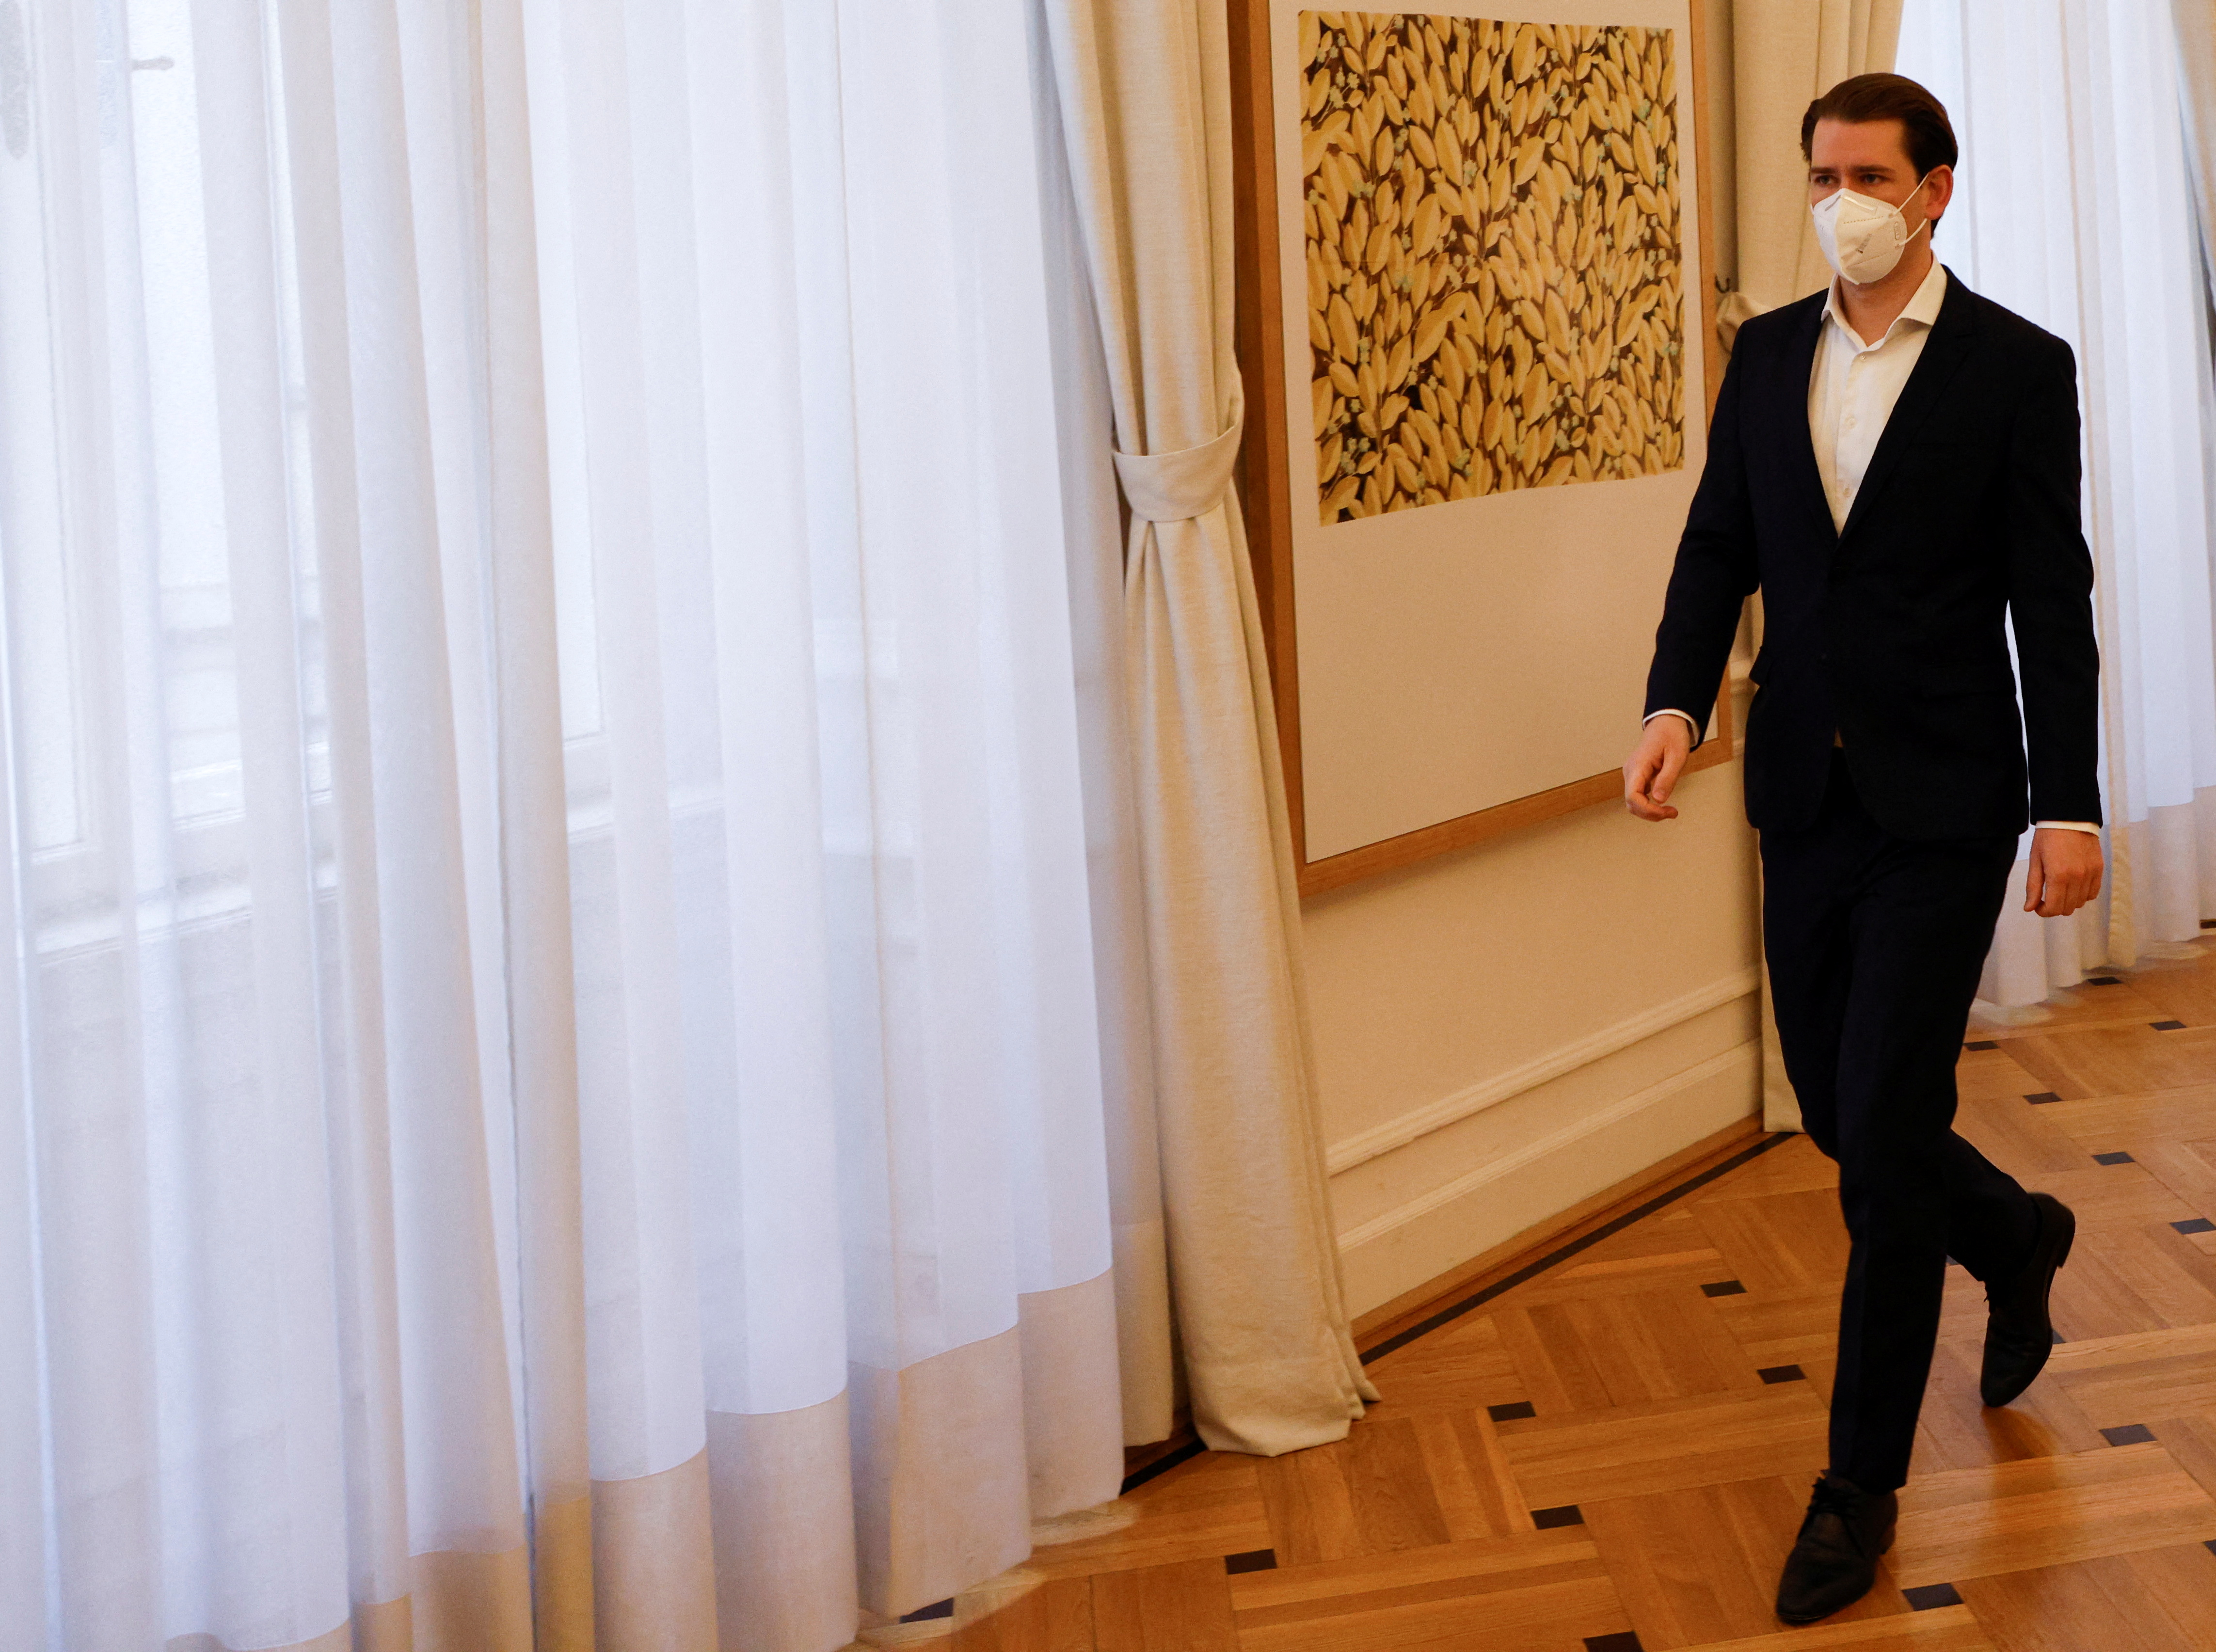 Austrian Chancellor Kurz arrives for a government meeting in Vienna